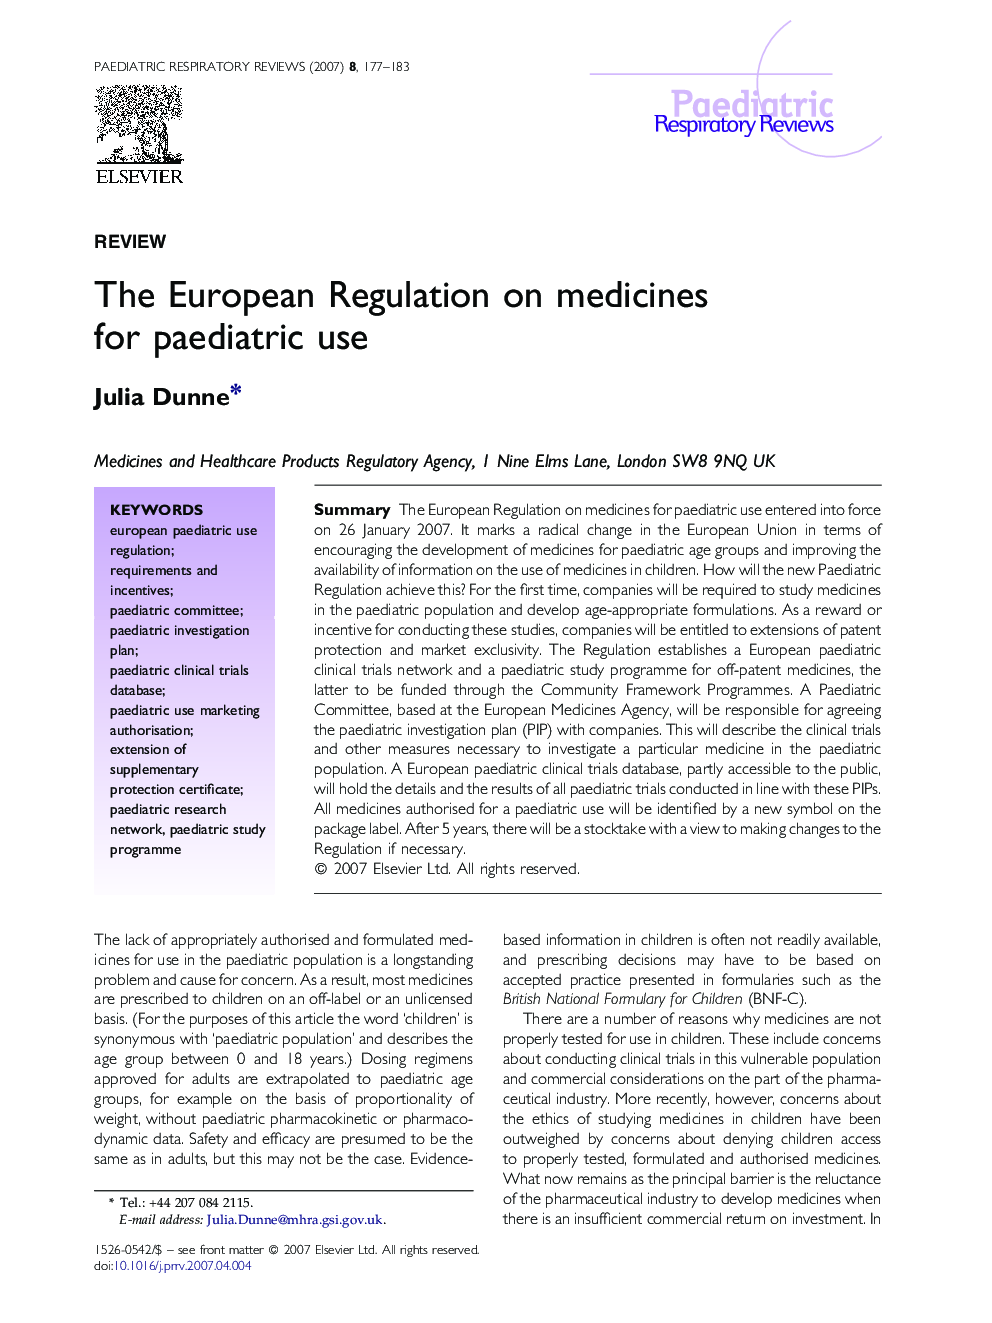 The European Regulation on medicines for paediatric use